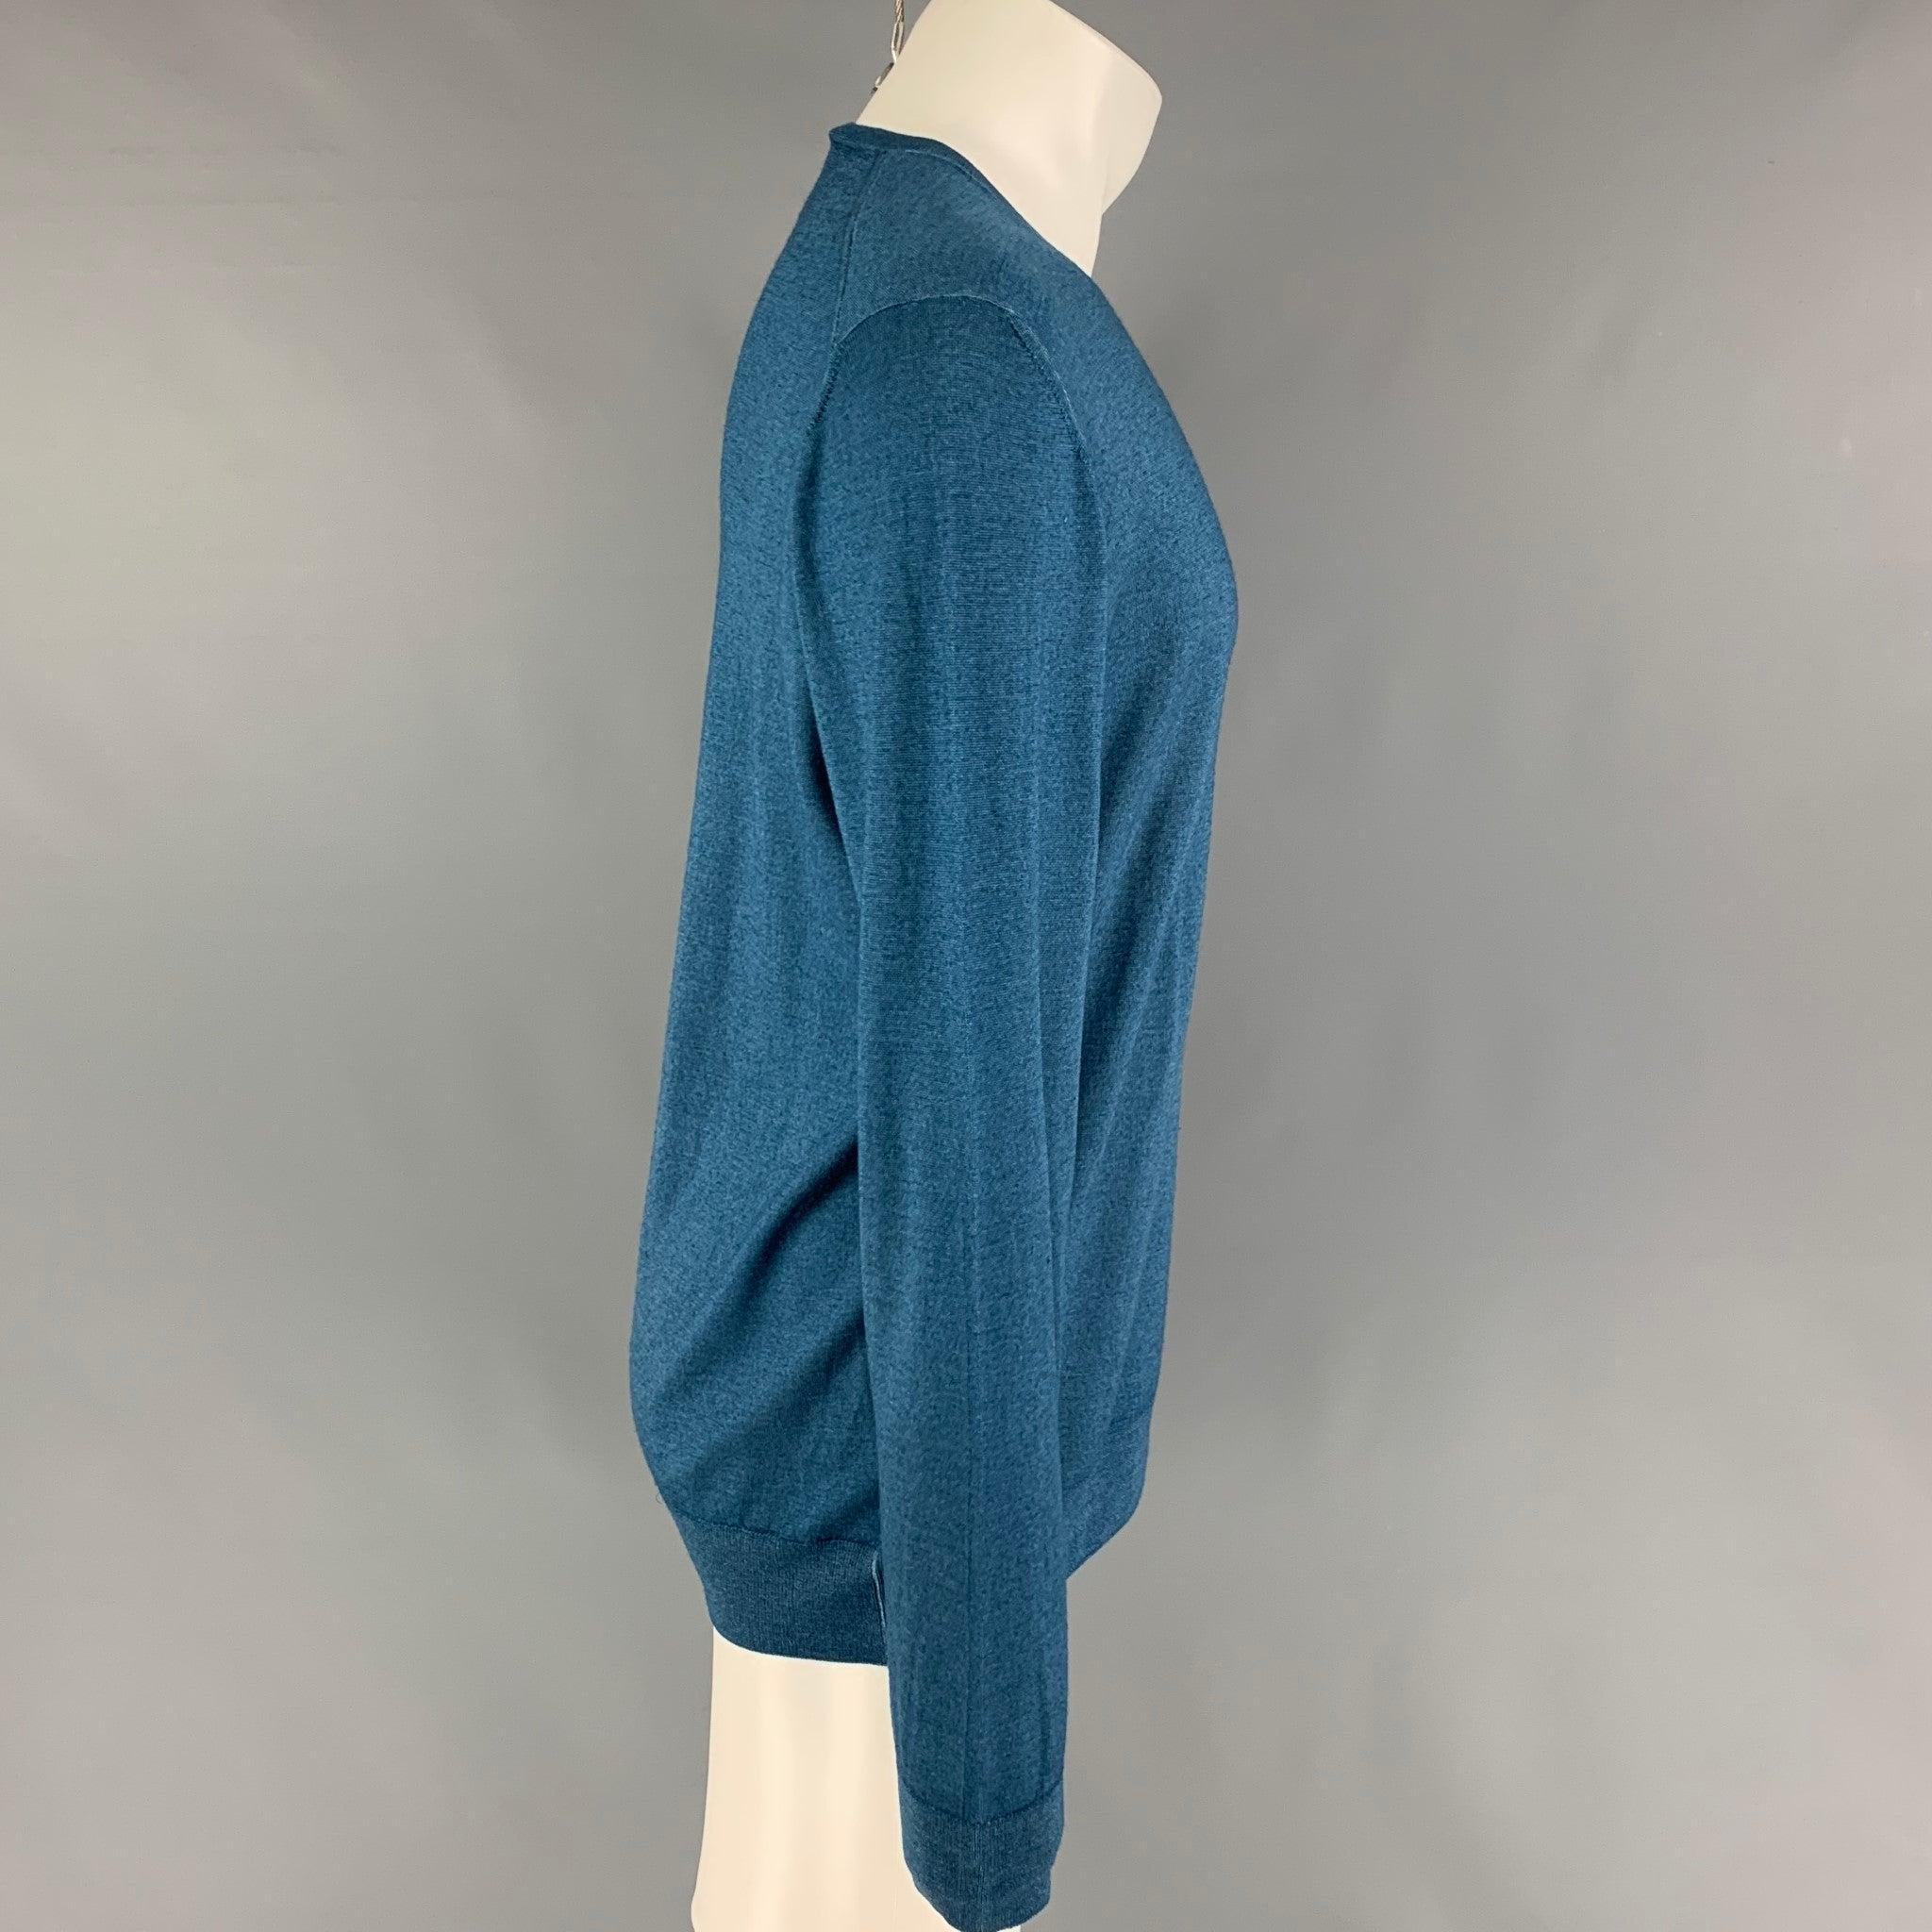 PRADA pullover comes in a blue cashmere / silk featuring a crew-neck. Made in Italy.
Very Good
Pre-Owned Condition. 

Marked:   54 

Measurements: 
 
Shoulder: 18.5 inches  Chest: 44 inches  Sleeve: 28.5 inches  Length: 29.5 inches 

  
  
